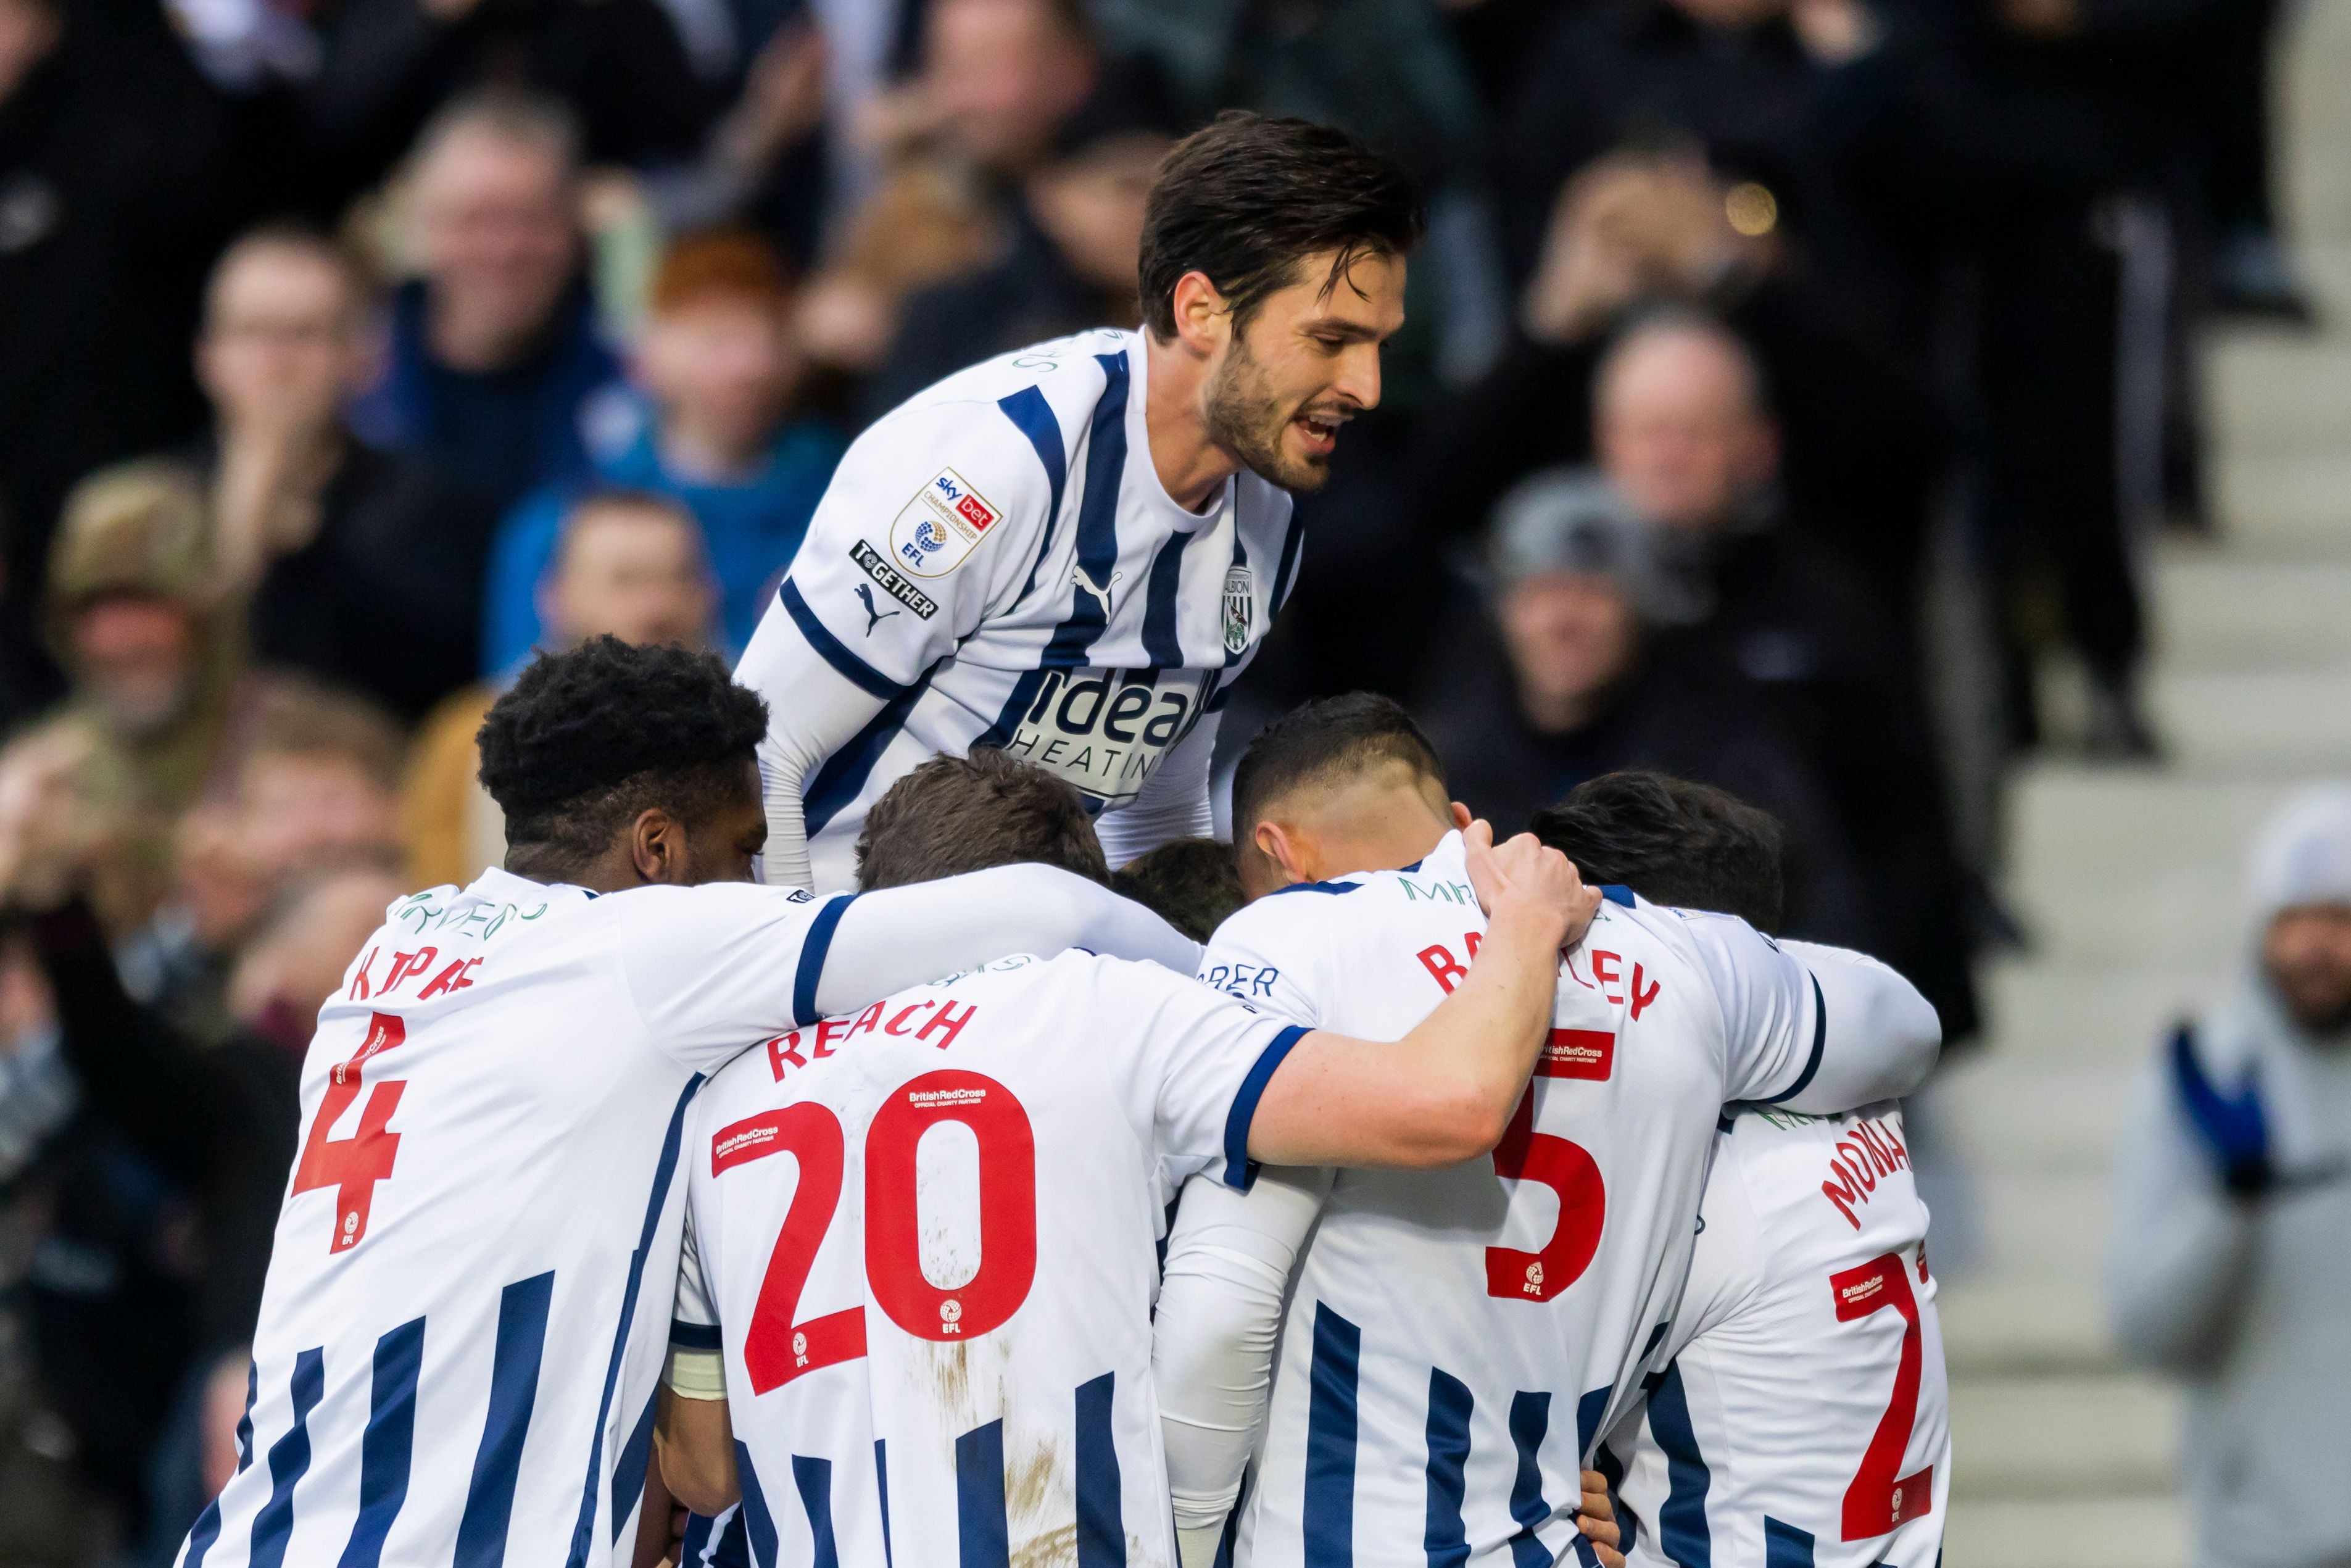 Albion players celebrate a goal at The Hawthorns